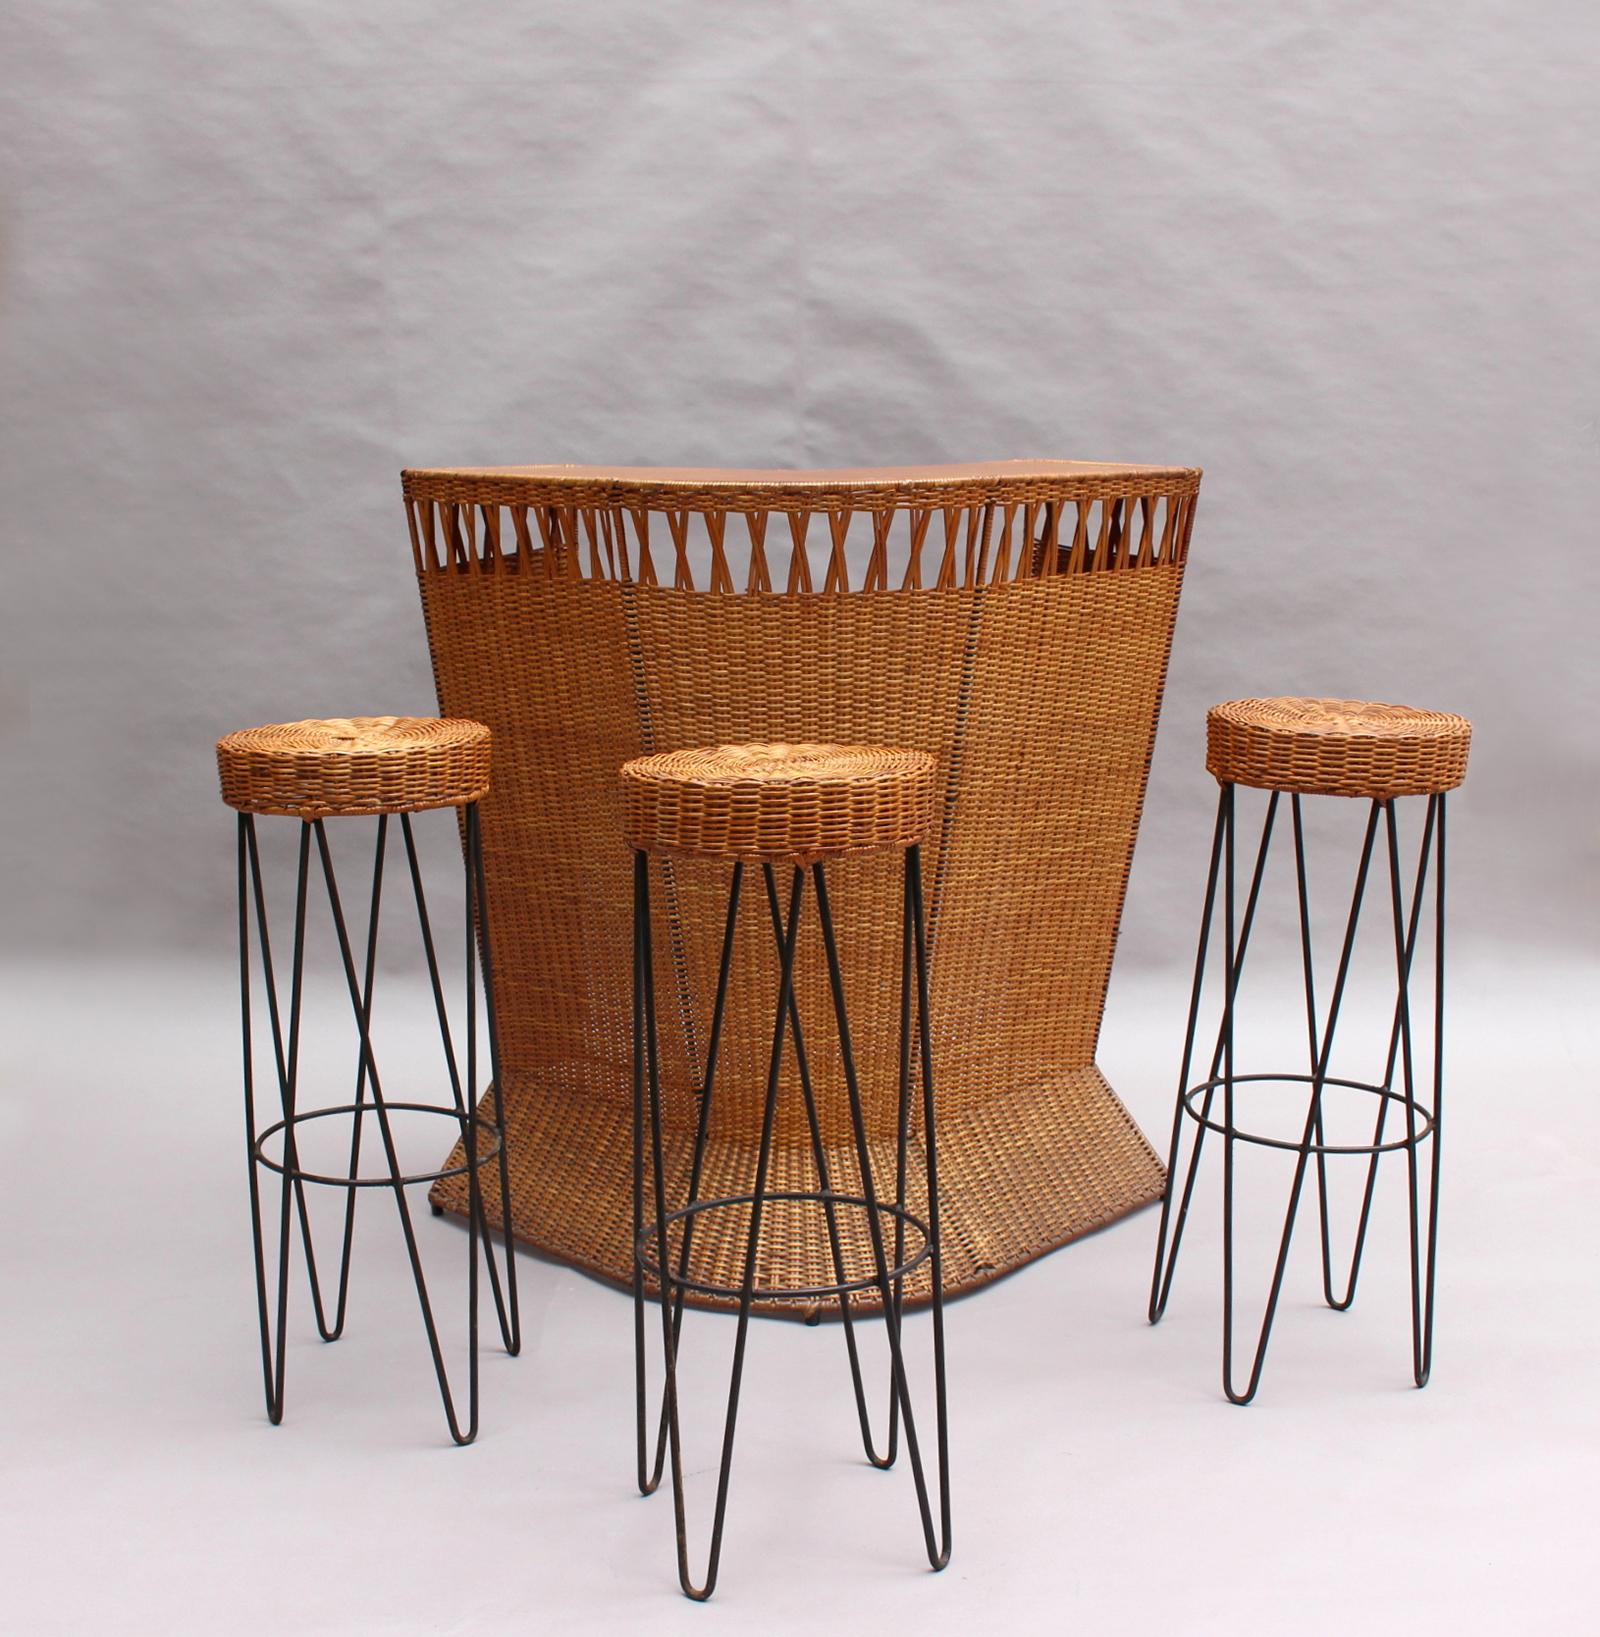 A French 1950s black metal-framed rattan bar with three matching wicker stools

3 additional stools are also available - 1stdibs ref # LU78488715193 - 

Stools dimensions are :
Height: 31.5 in. (80 cm)
Diameter: 13 in. (33 cm).
 